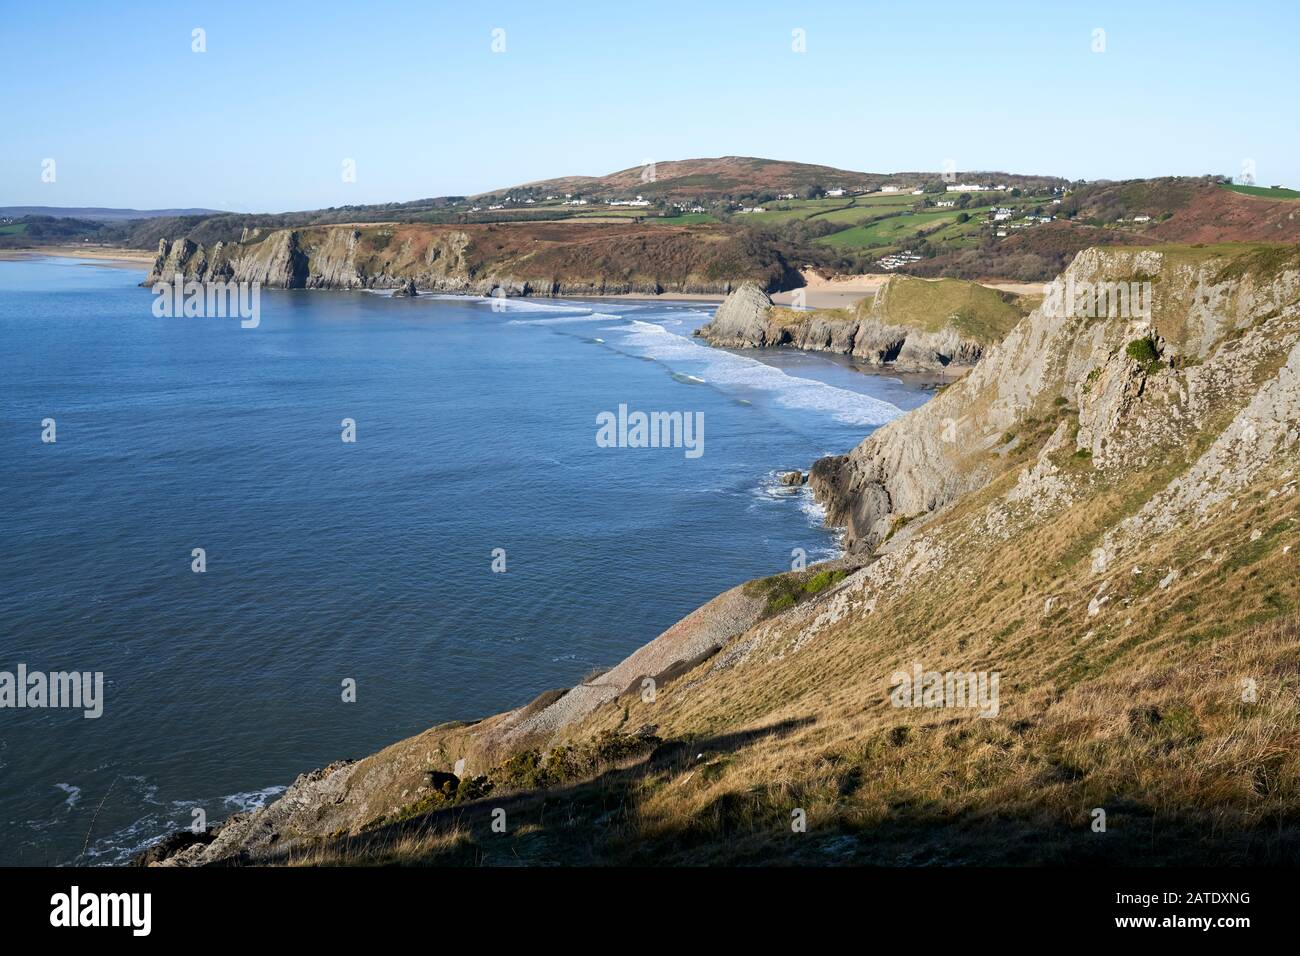 View of Three Cliffs Bay on the Gower Peninsula, Swansea taken from near Southgate, Wales in winter. Stock Photo